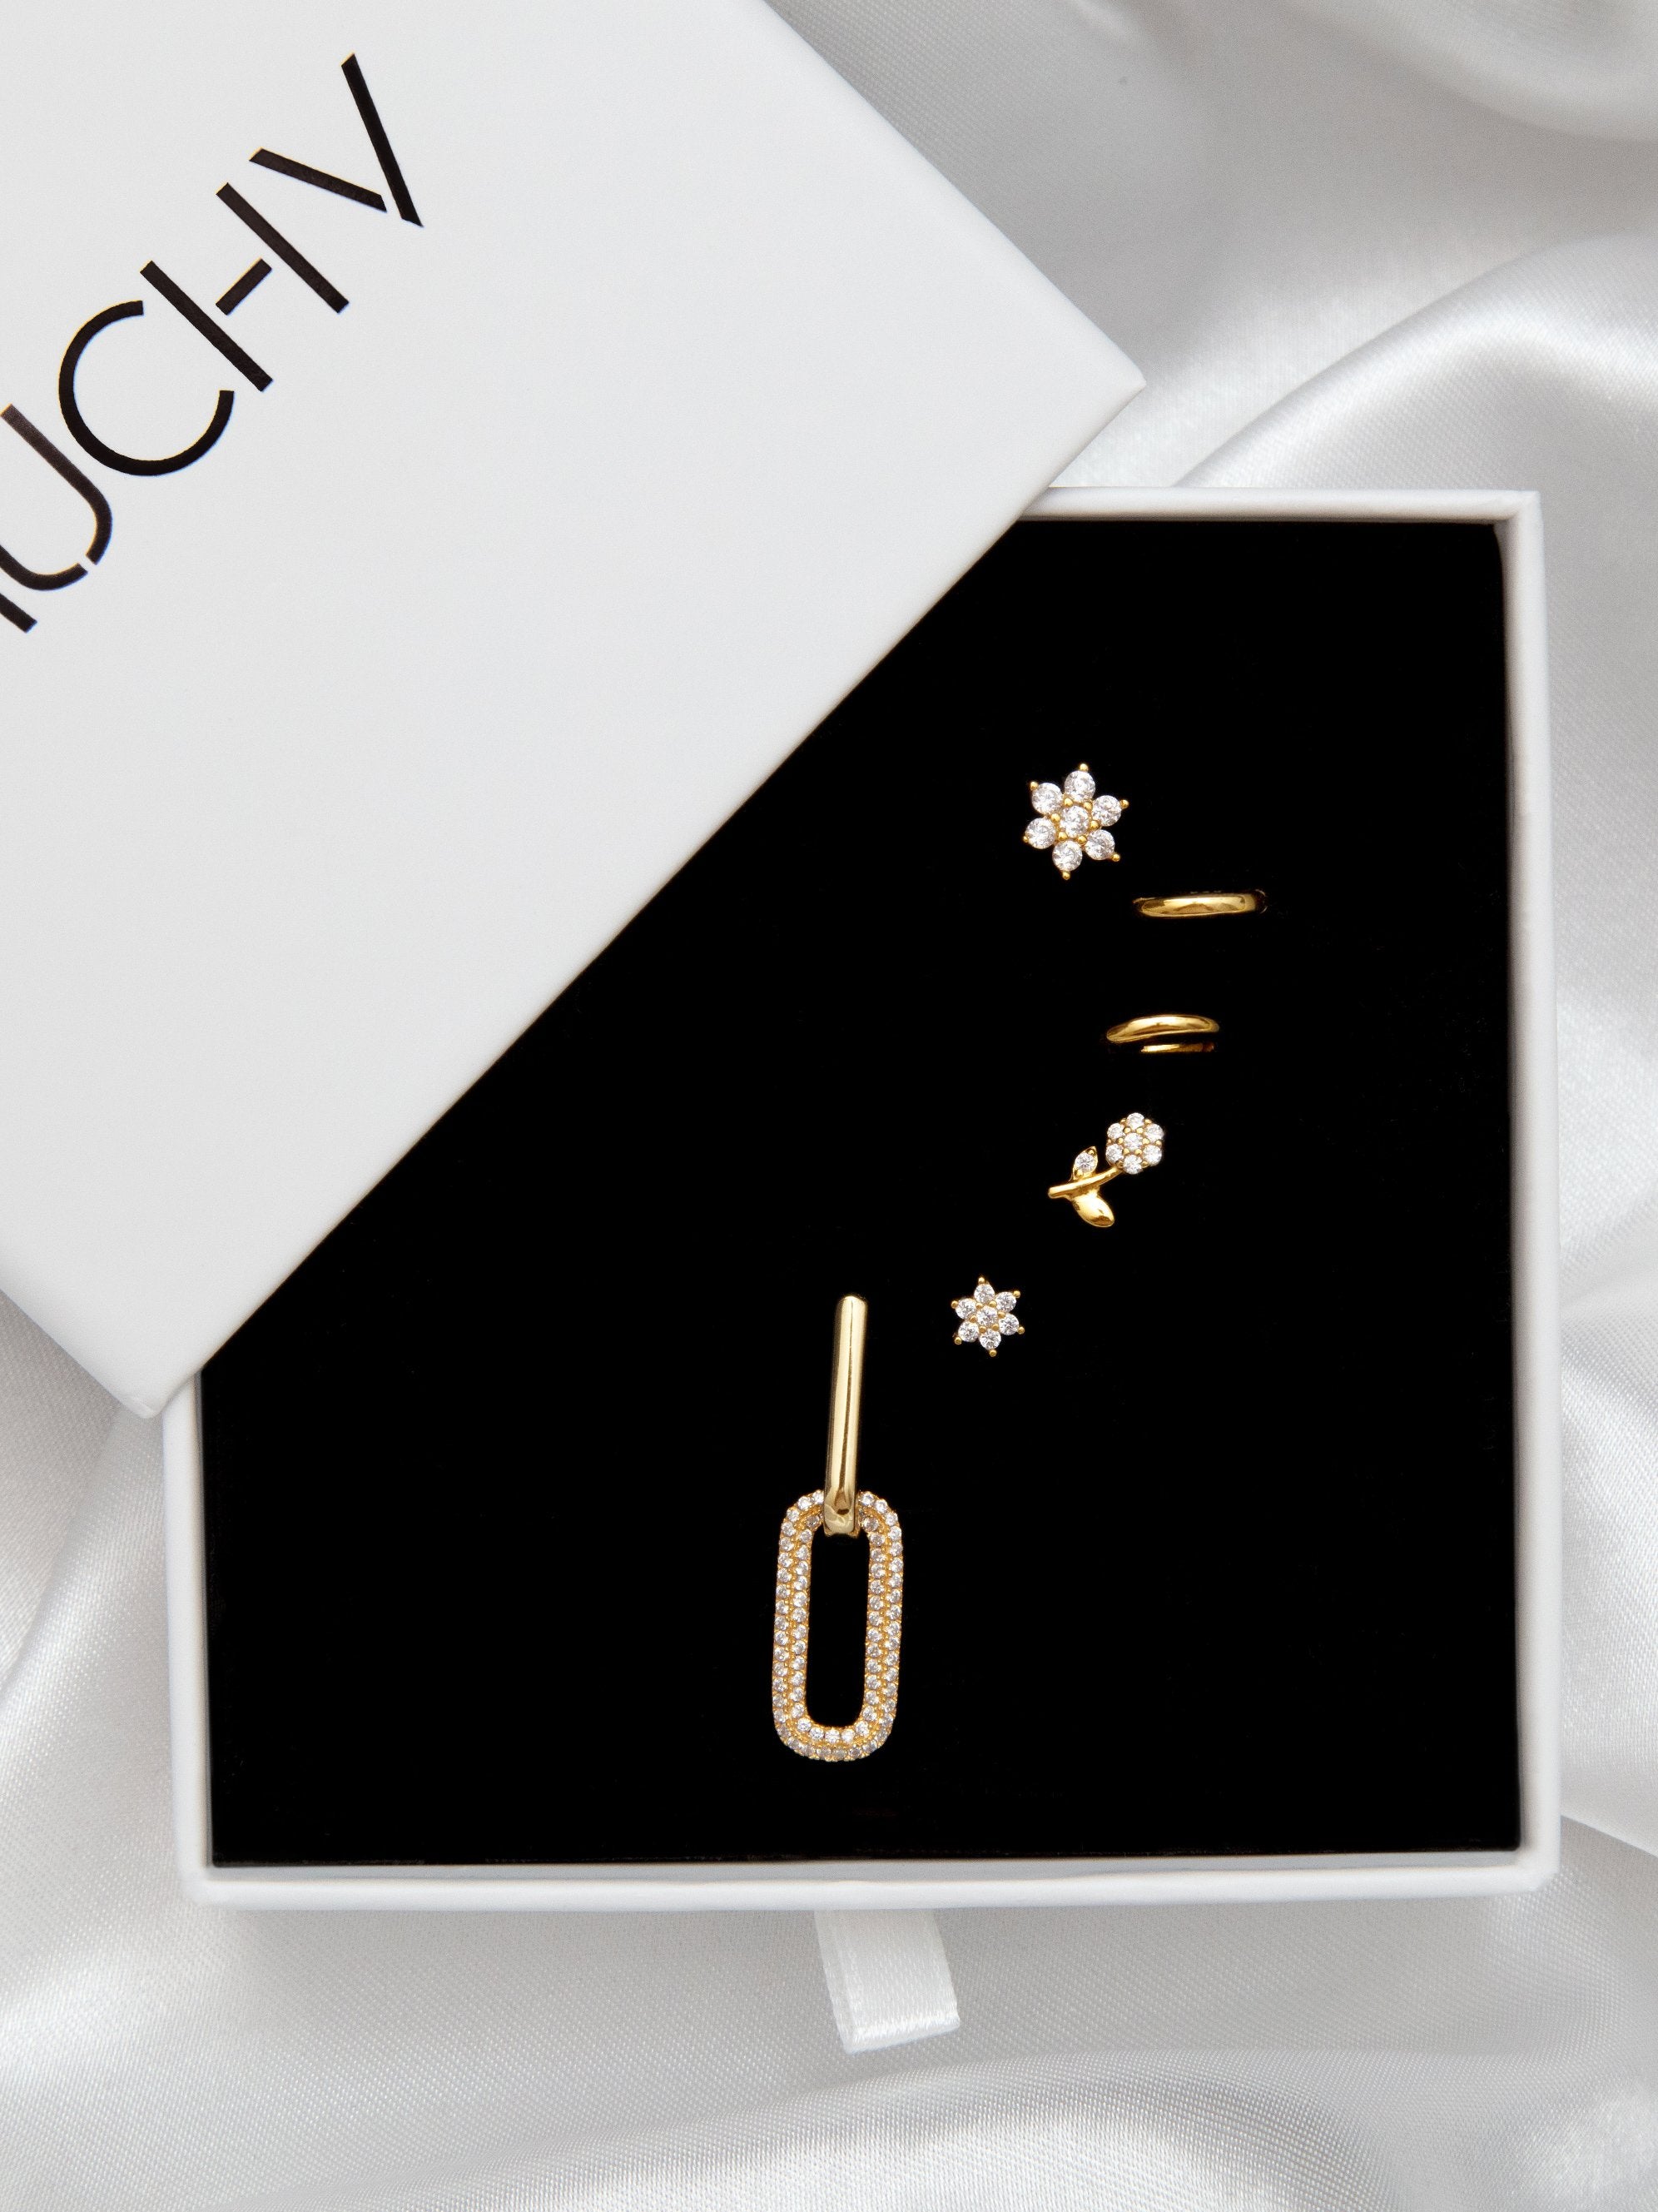 Flower stud earrings styled with various gold earrings inside a gift box.